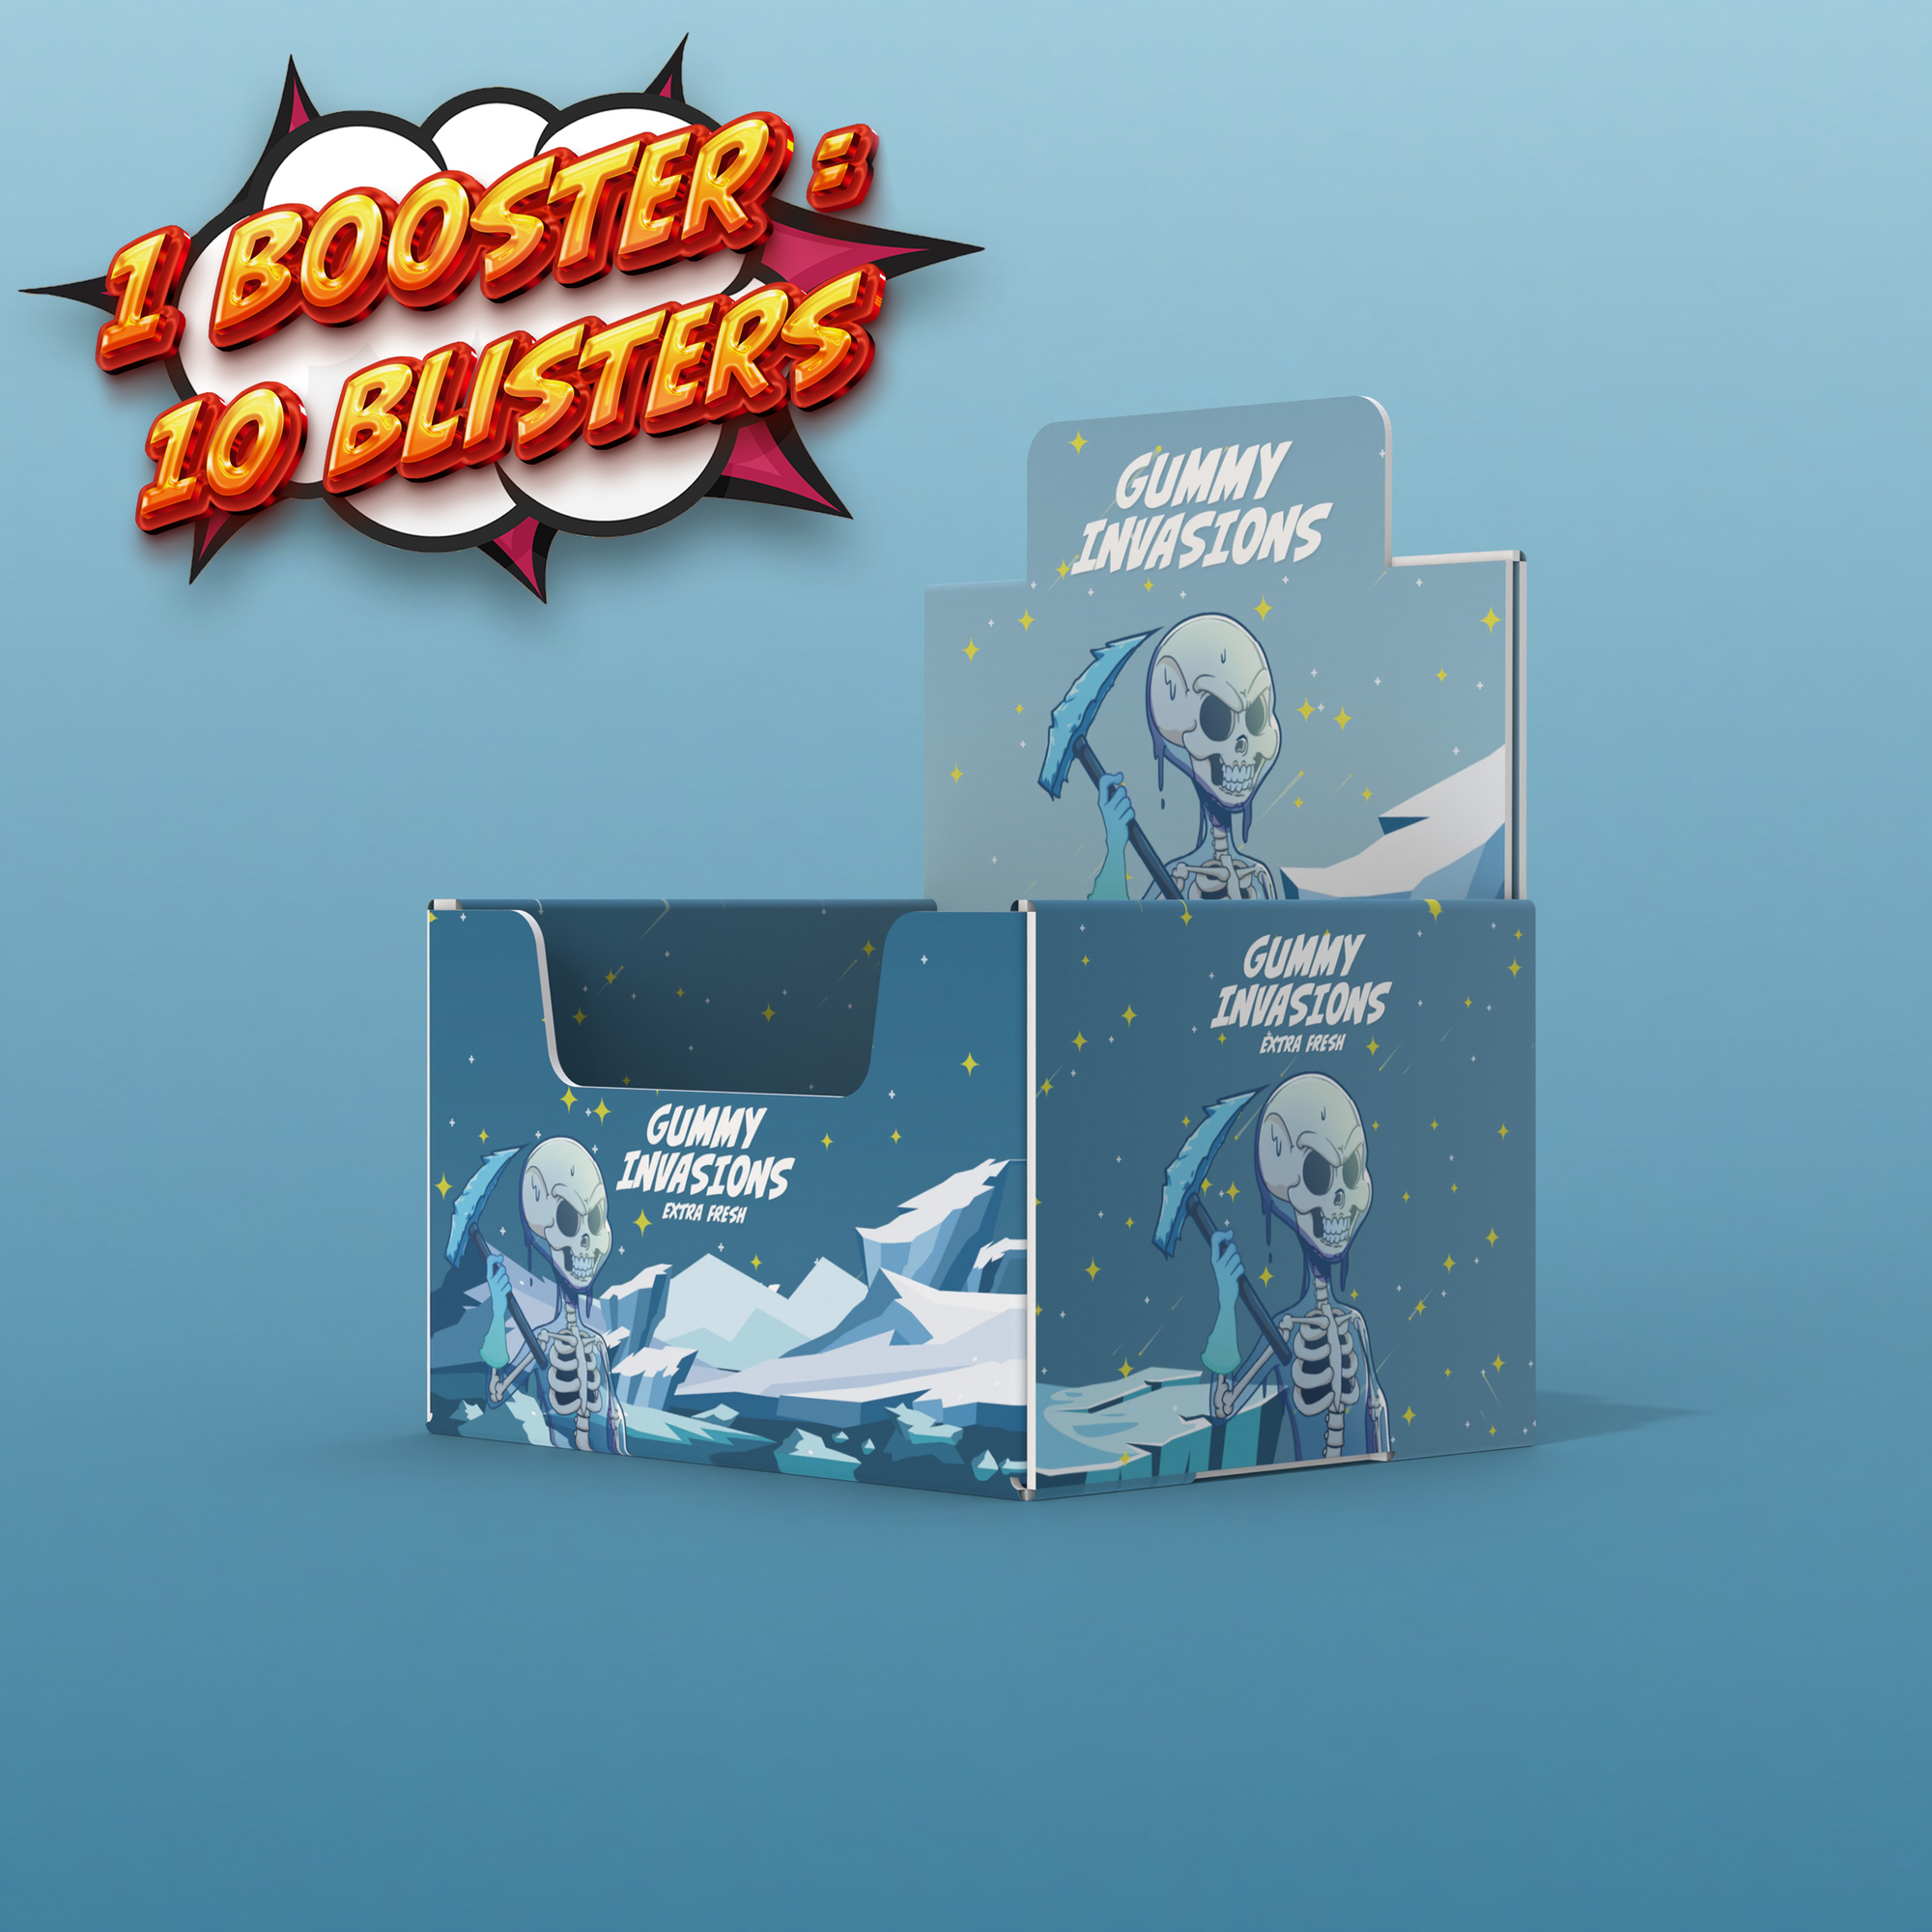 Extra Fresh - 1 Booster (10 Blisters)